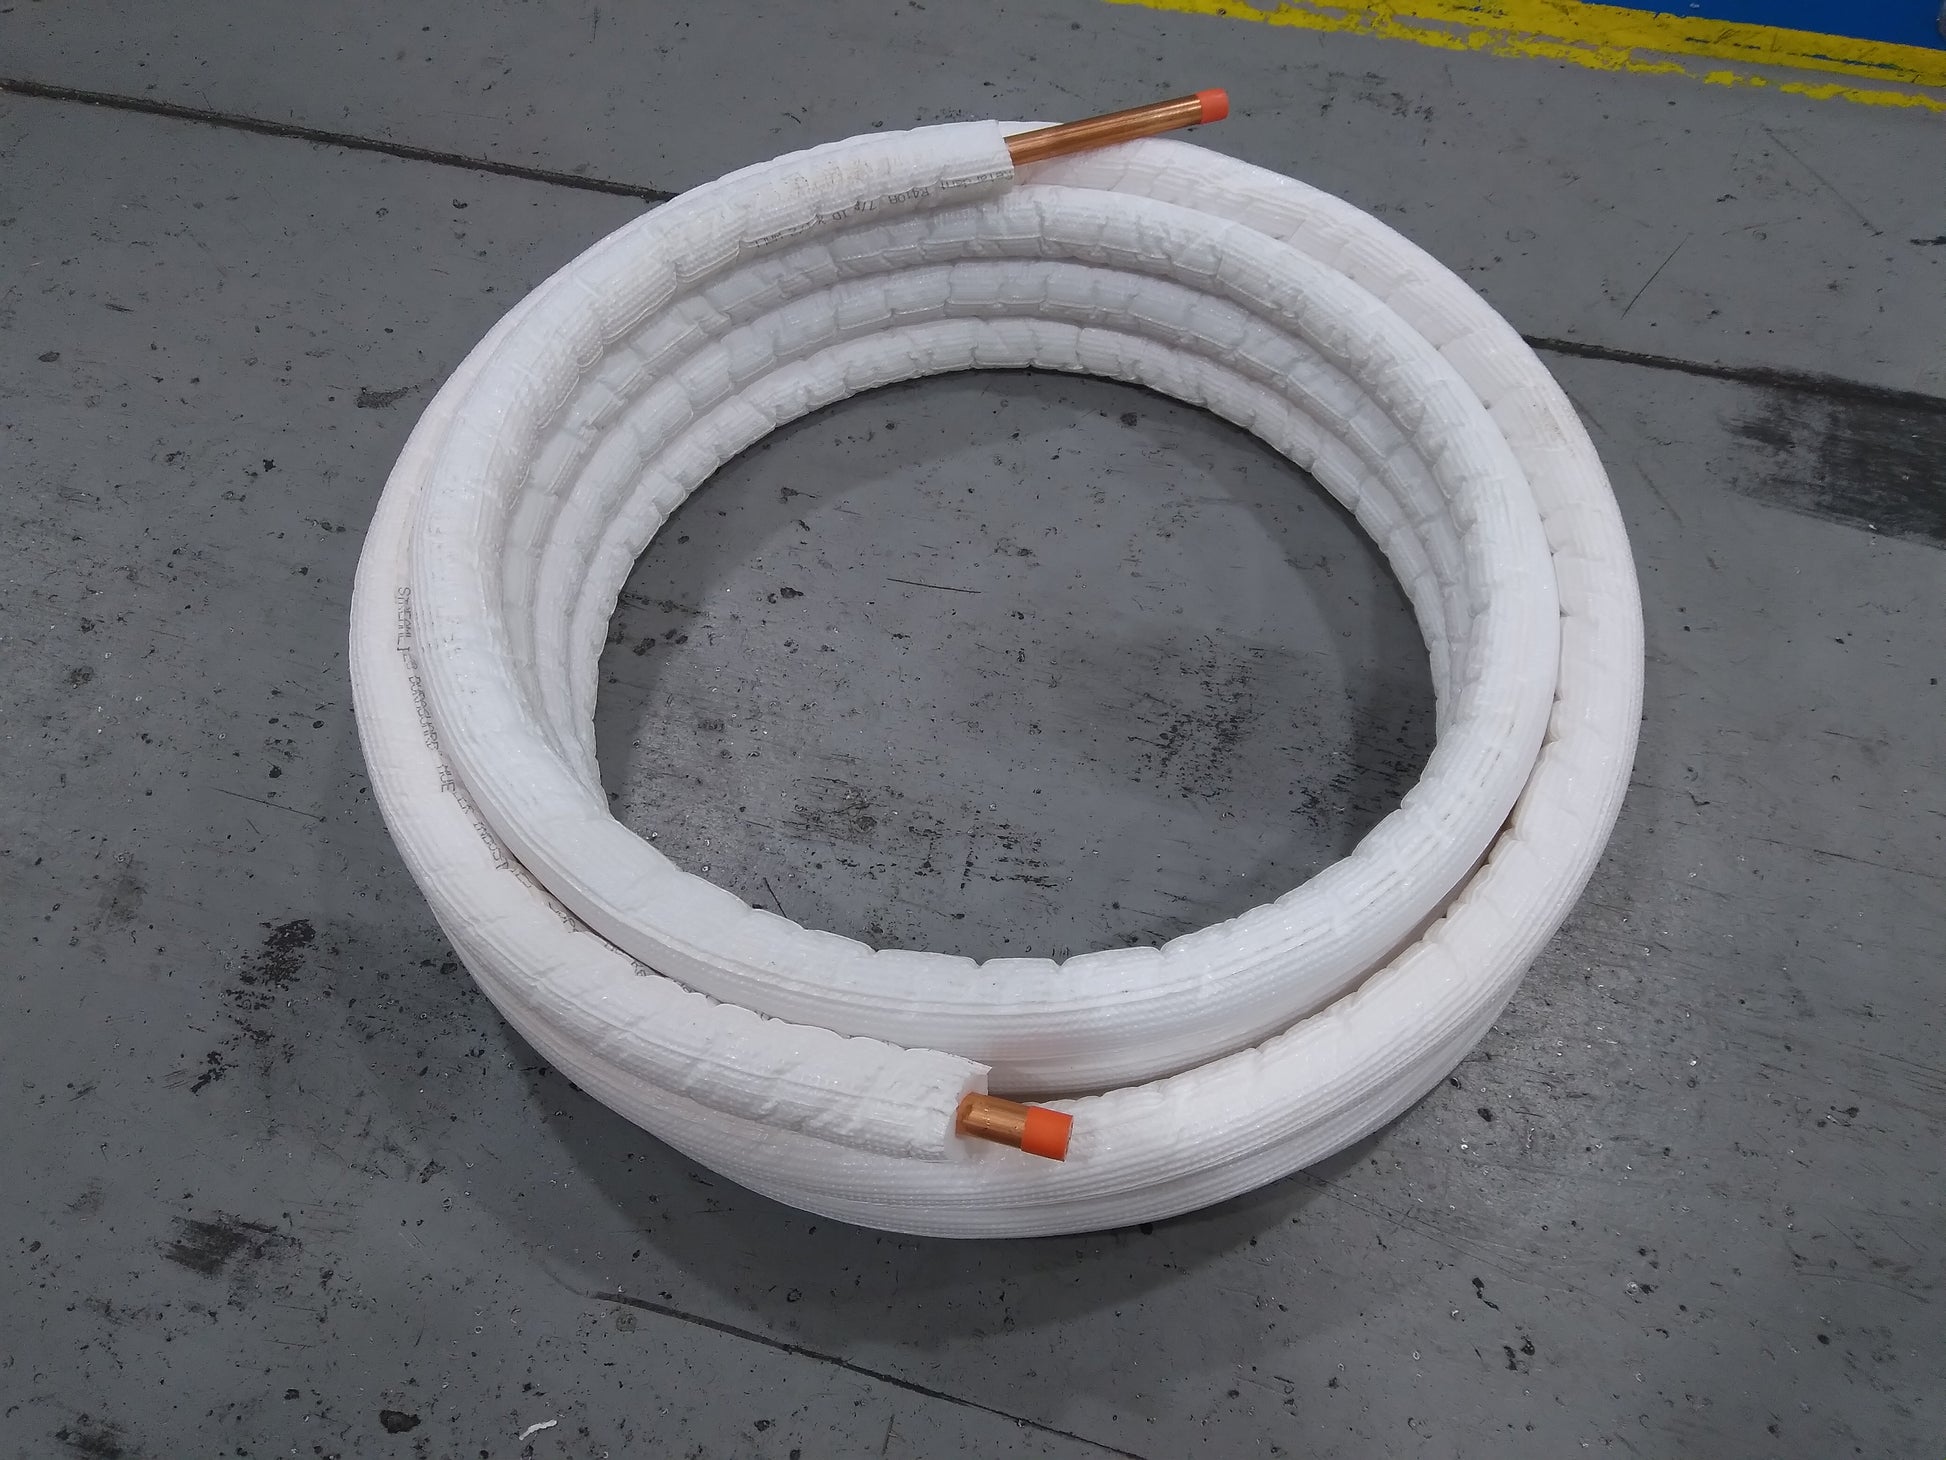 7/8" x 1/2" X 50' INSULATED SUCTION LINE ONLY